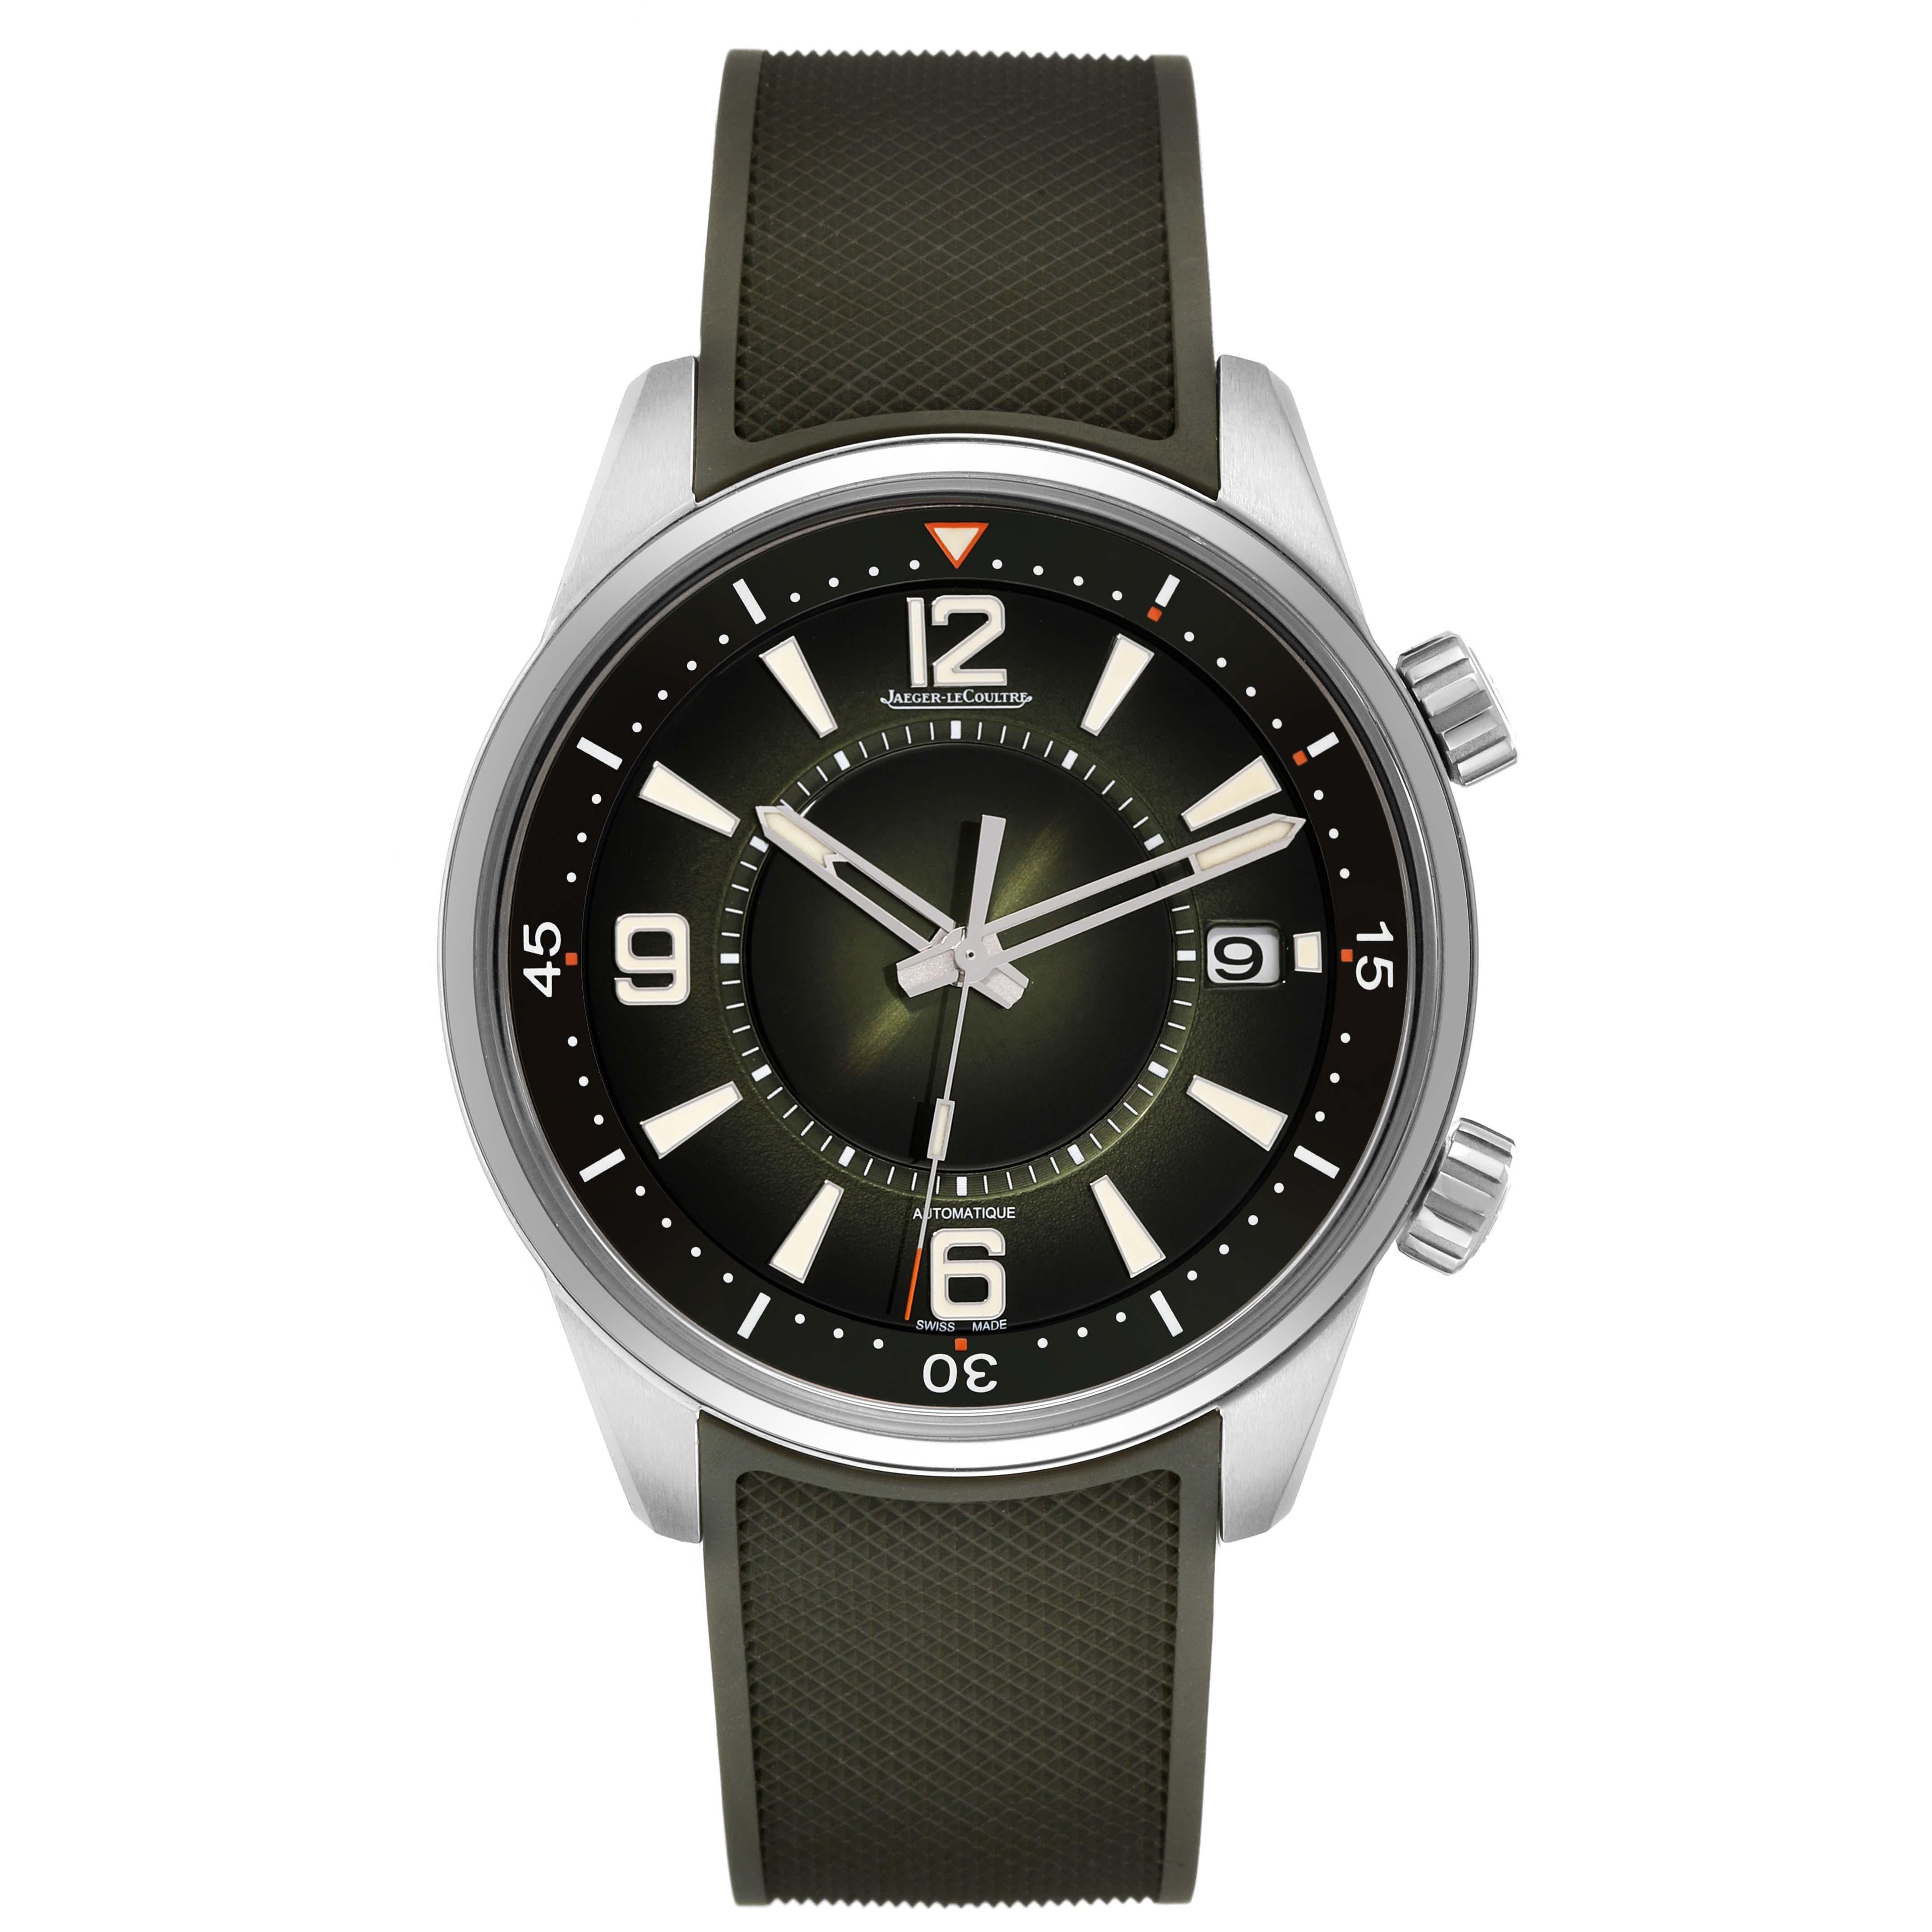 Jaeger LeCoultre Polaris Date Steel Mens Watch 857.8.A0.S Q906863J. Automatic self-winding movement. Stainless steel case 42 mm in diameter. Smooth stainless steel bezel. Scratch resistant sapphire crystal. Green dial with raised luminous index hour